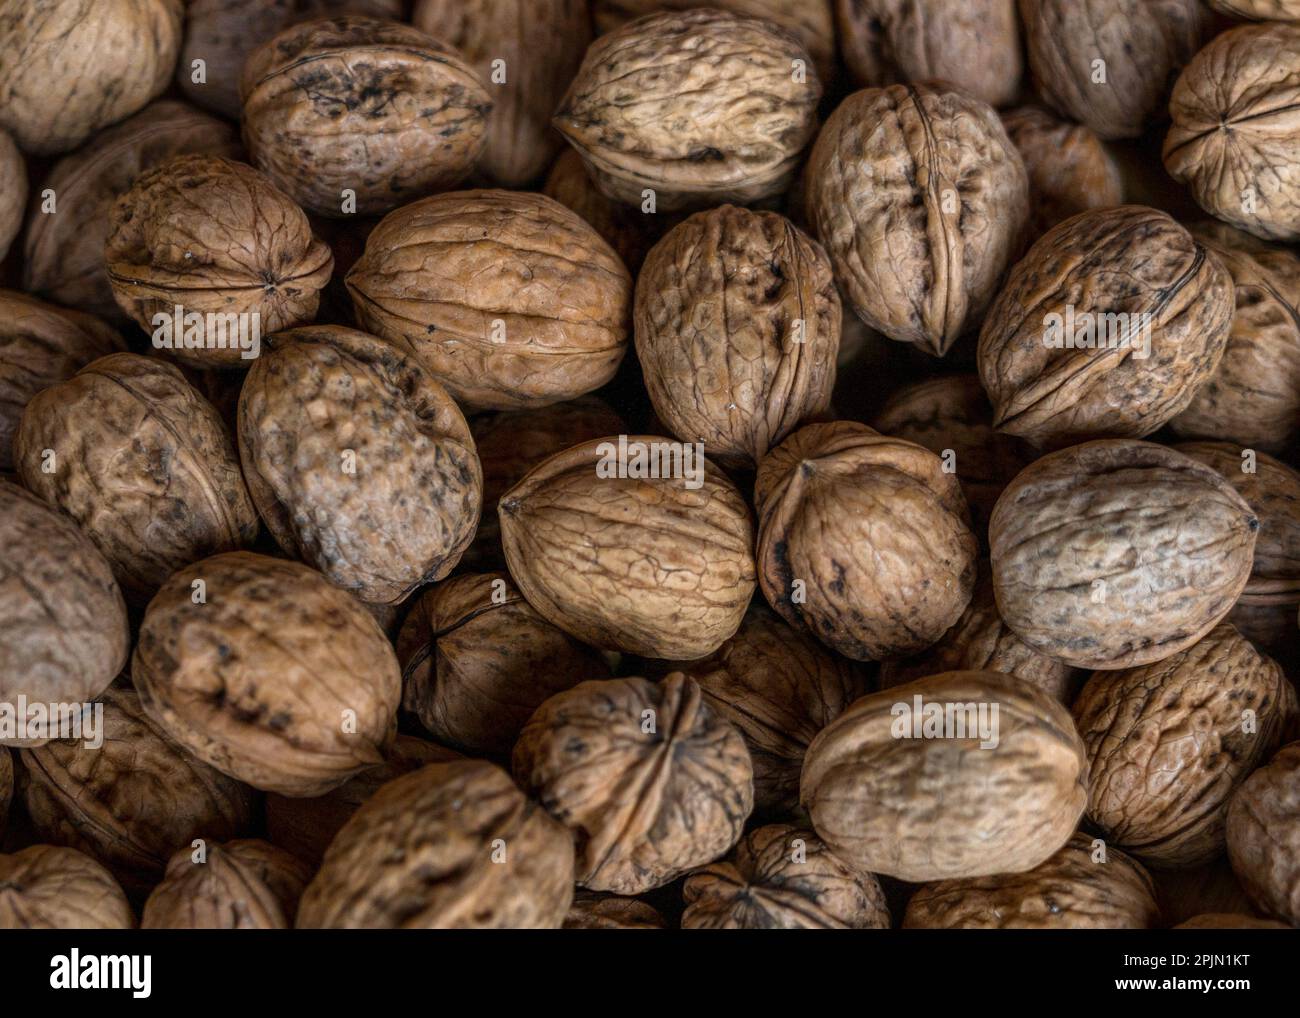 top-down view of many organic walnuts just after harvesting Stock Photo